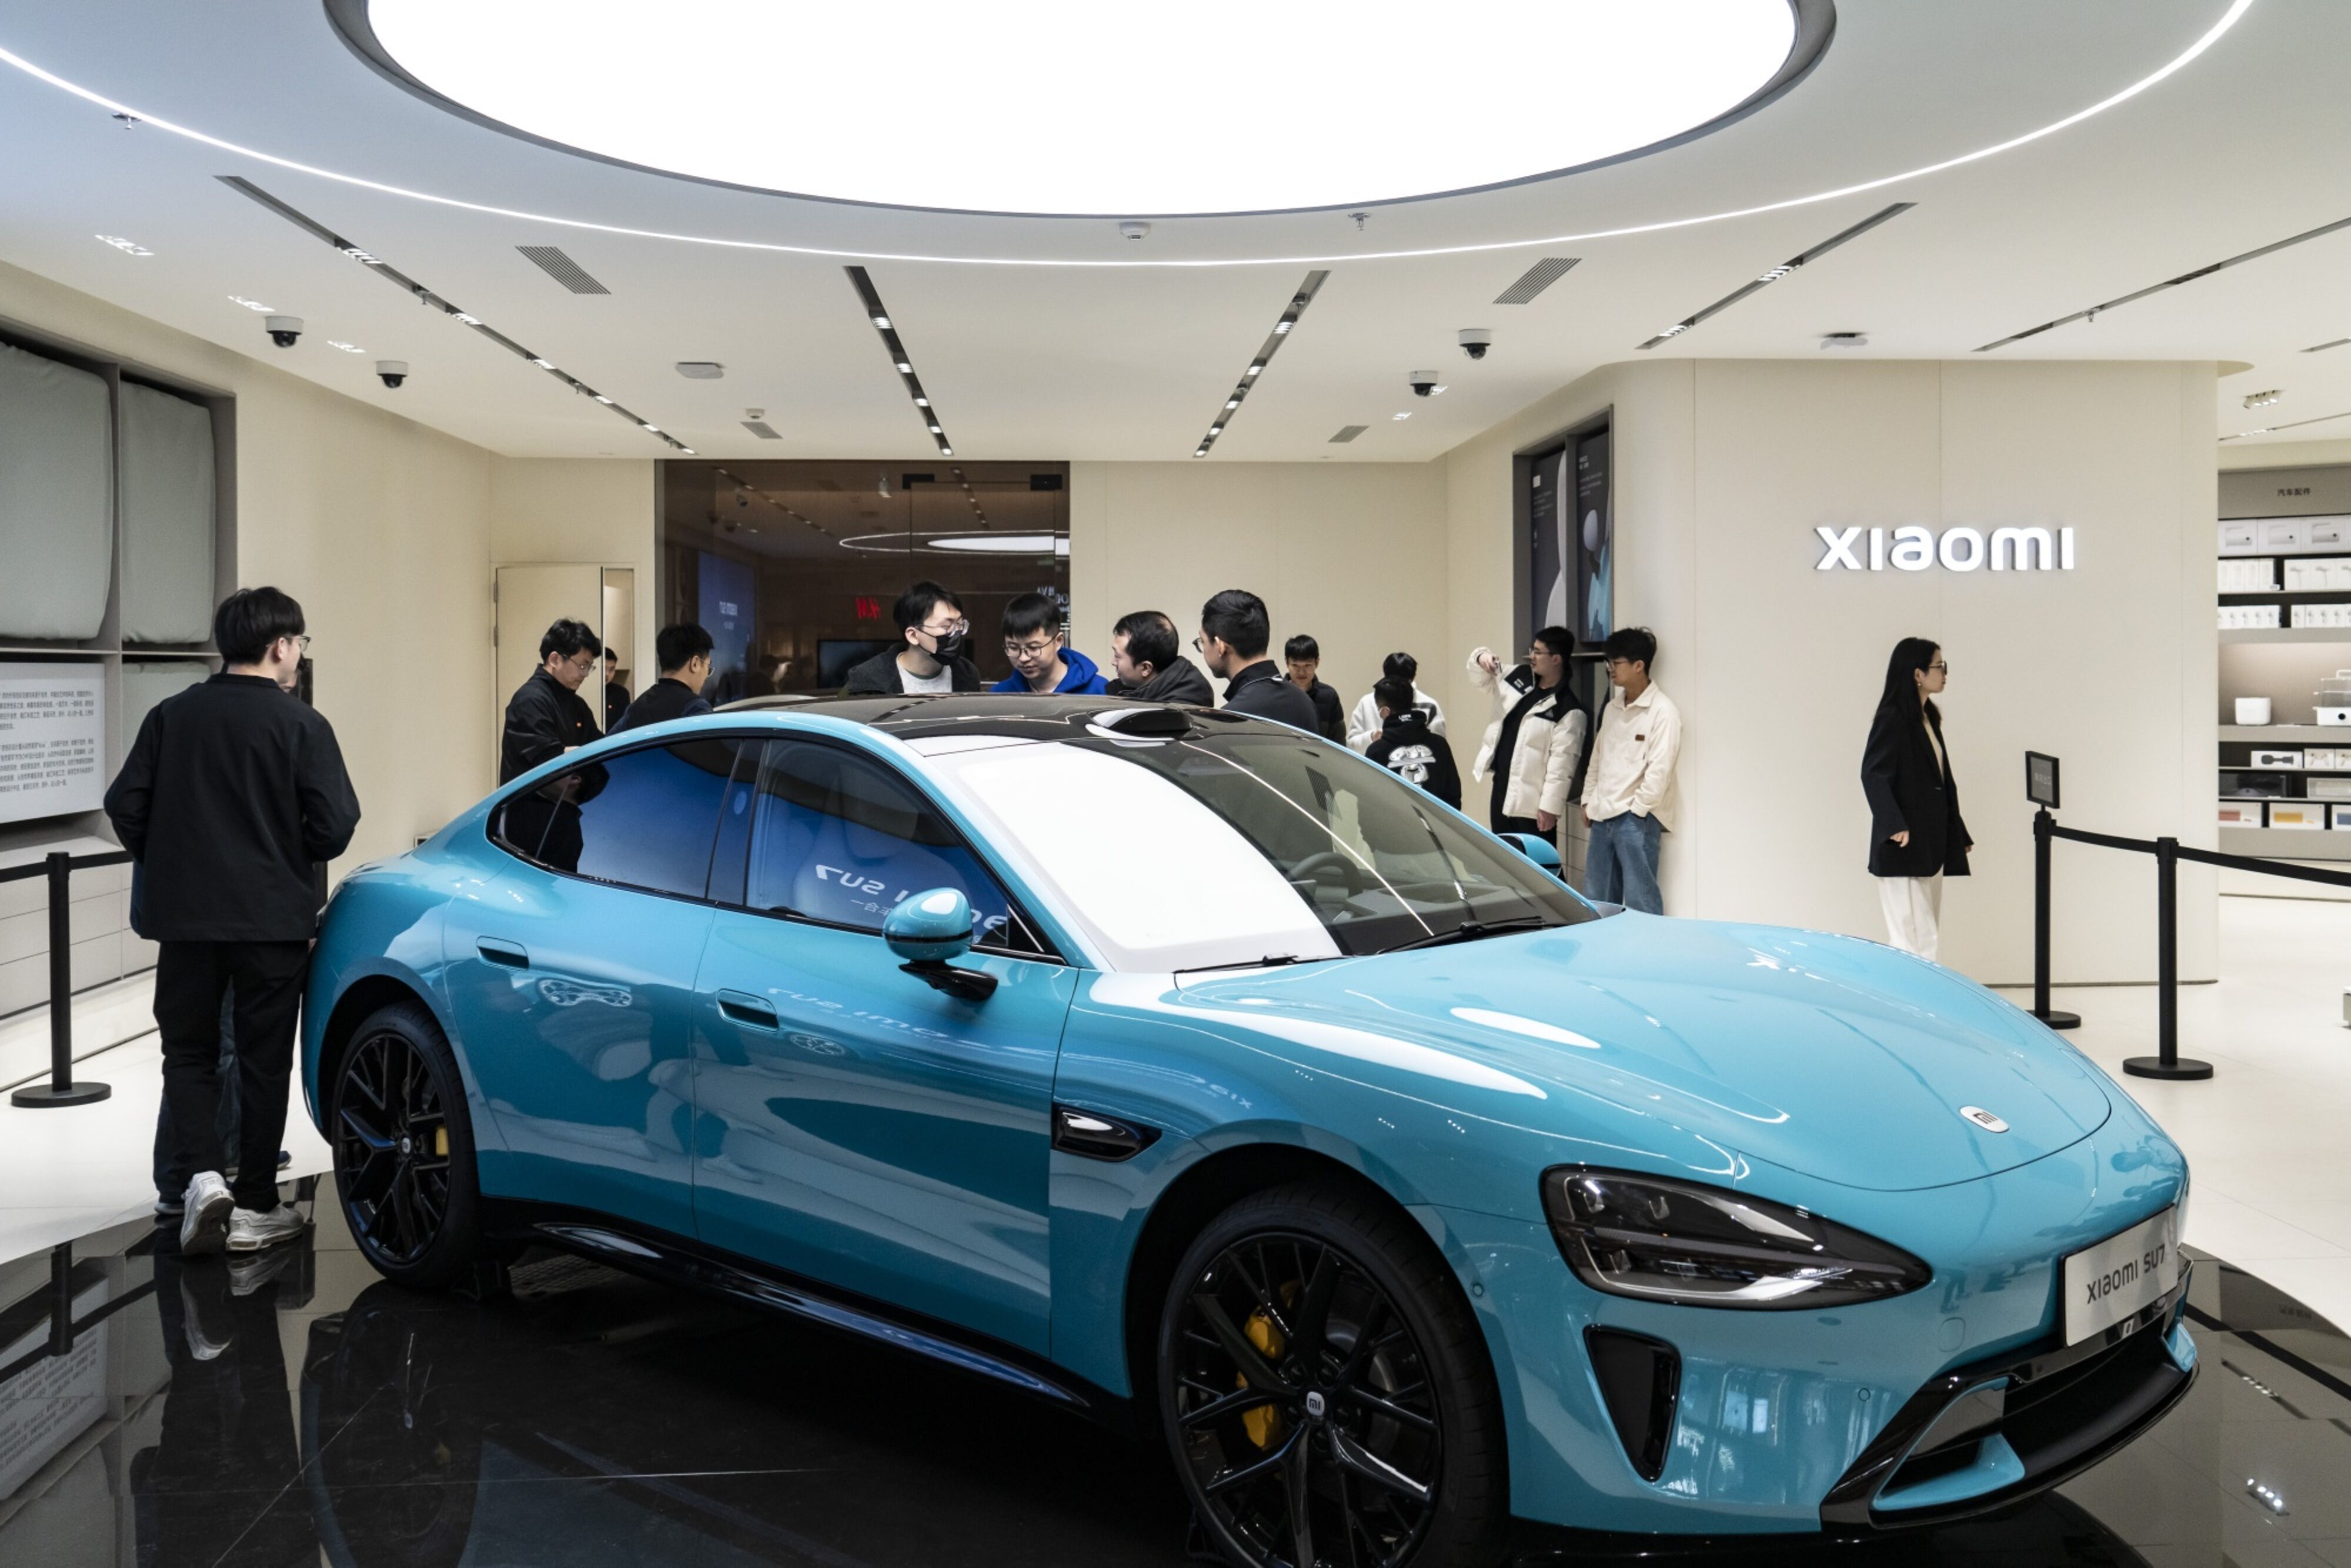 Xiaomi’s has yet to disclose the price of its first electric car, the SU7. Photo: Bloomberg